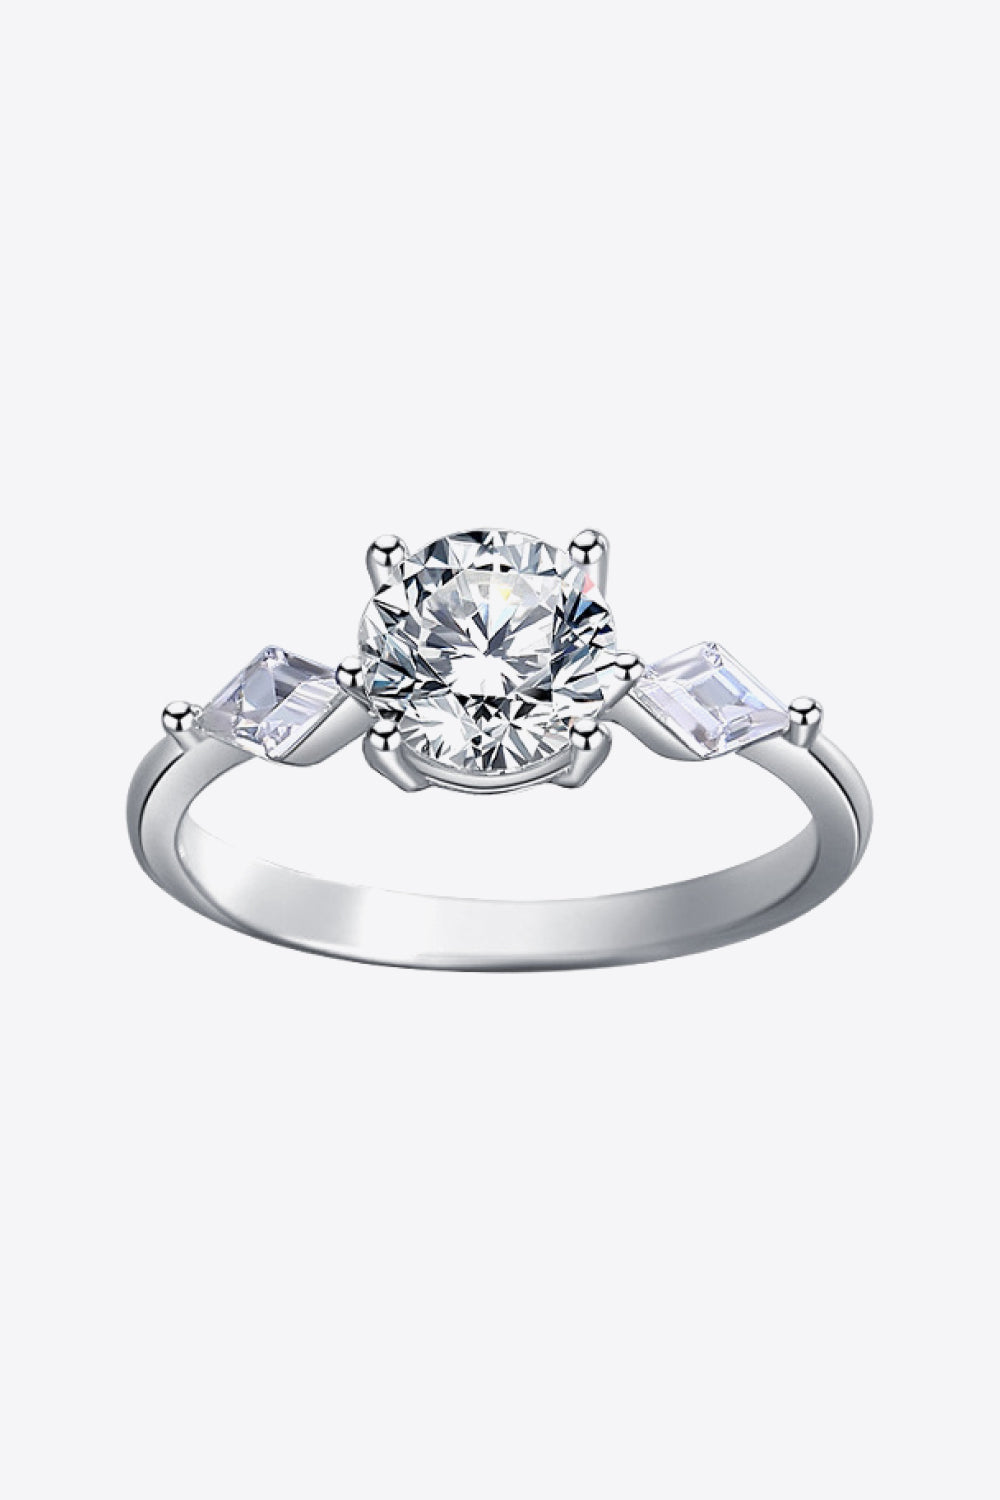 In The Meantime Moissanite Ring - DromedarShop.com Online Boutique